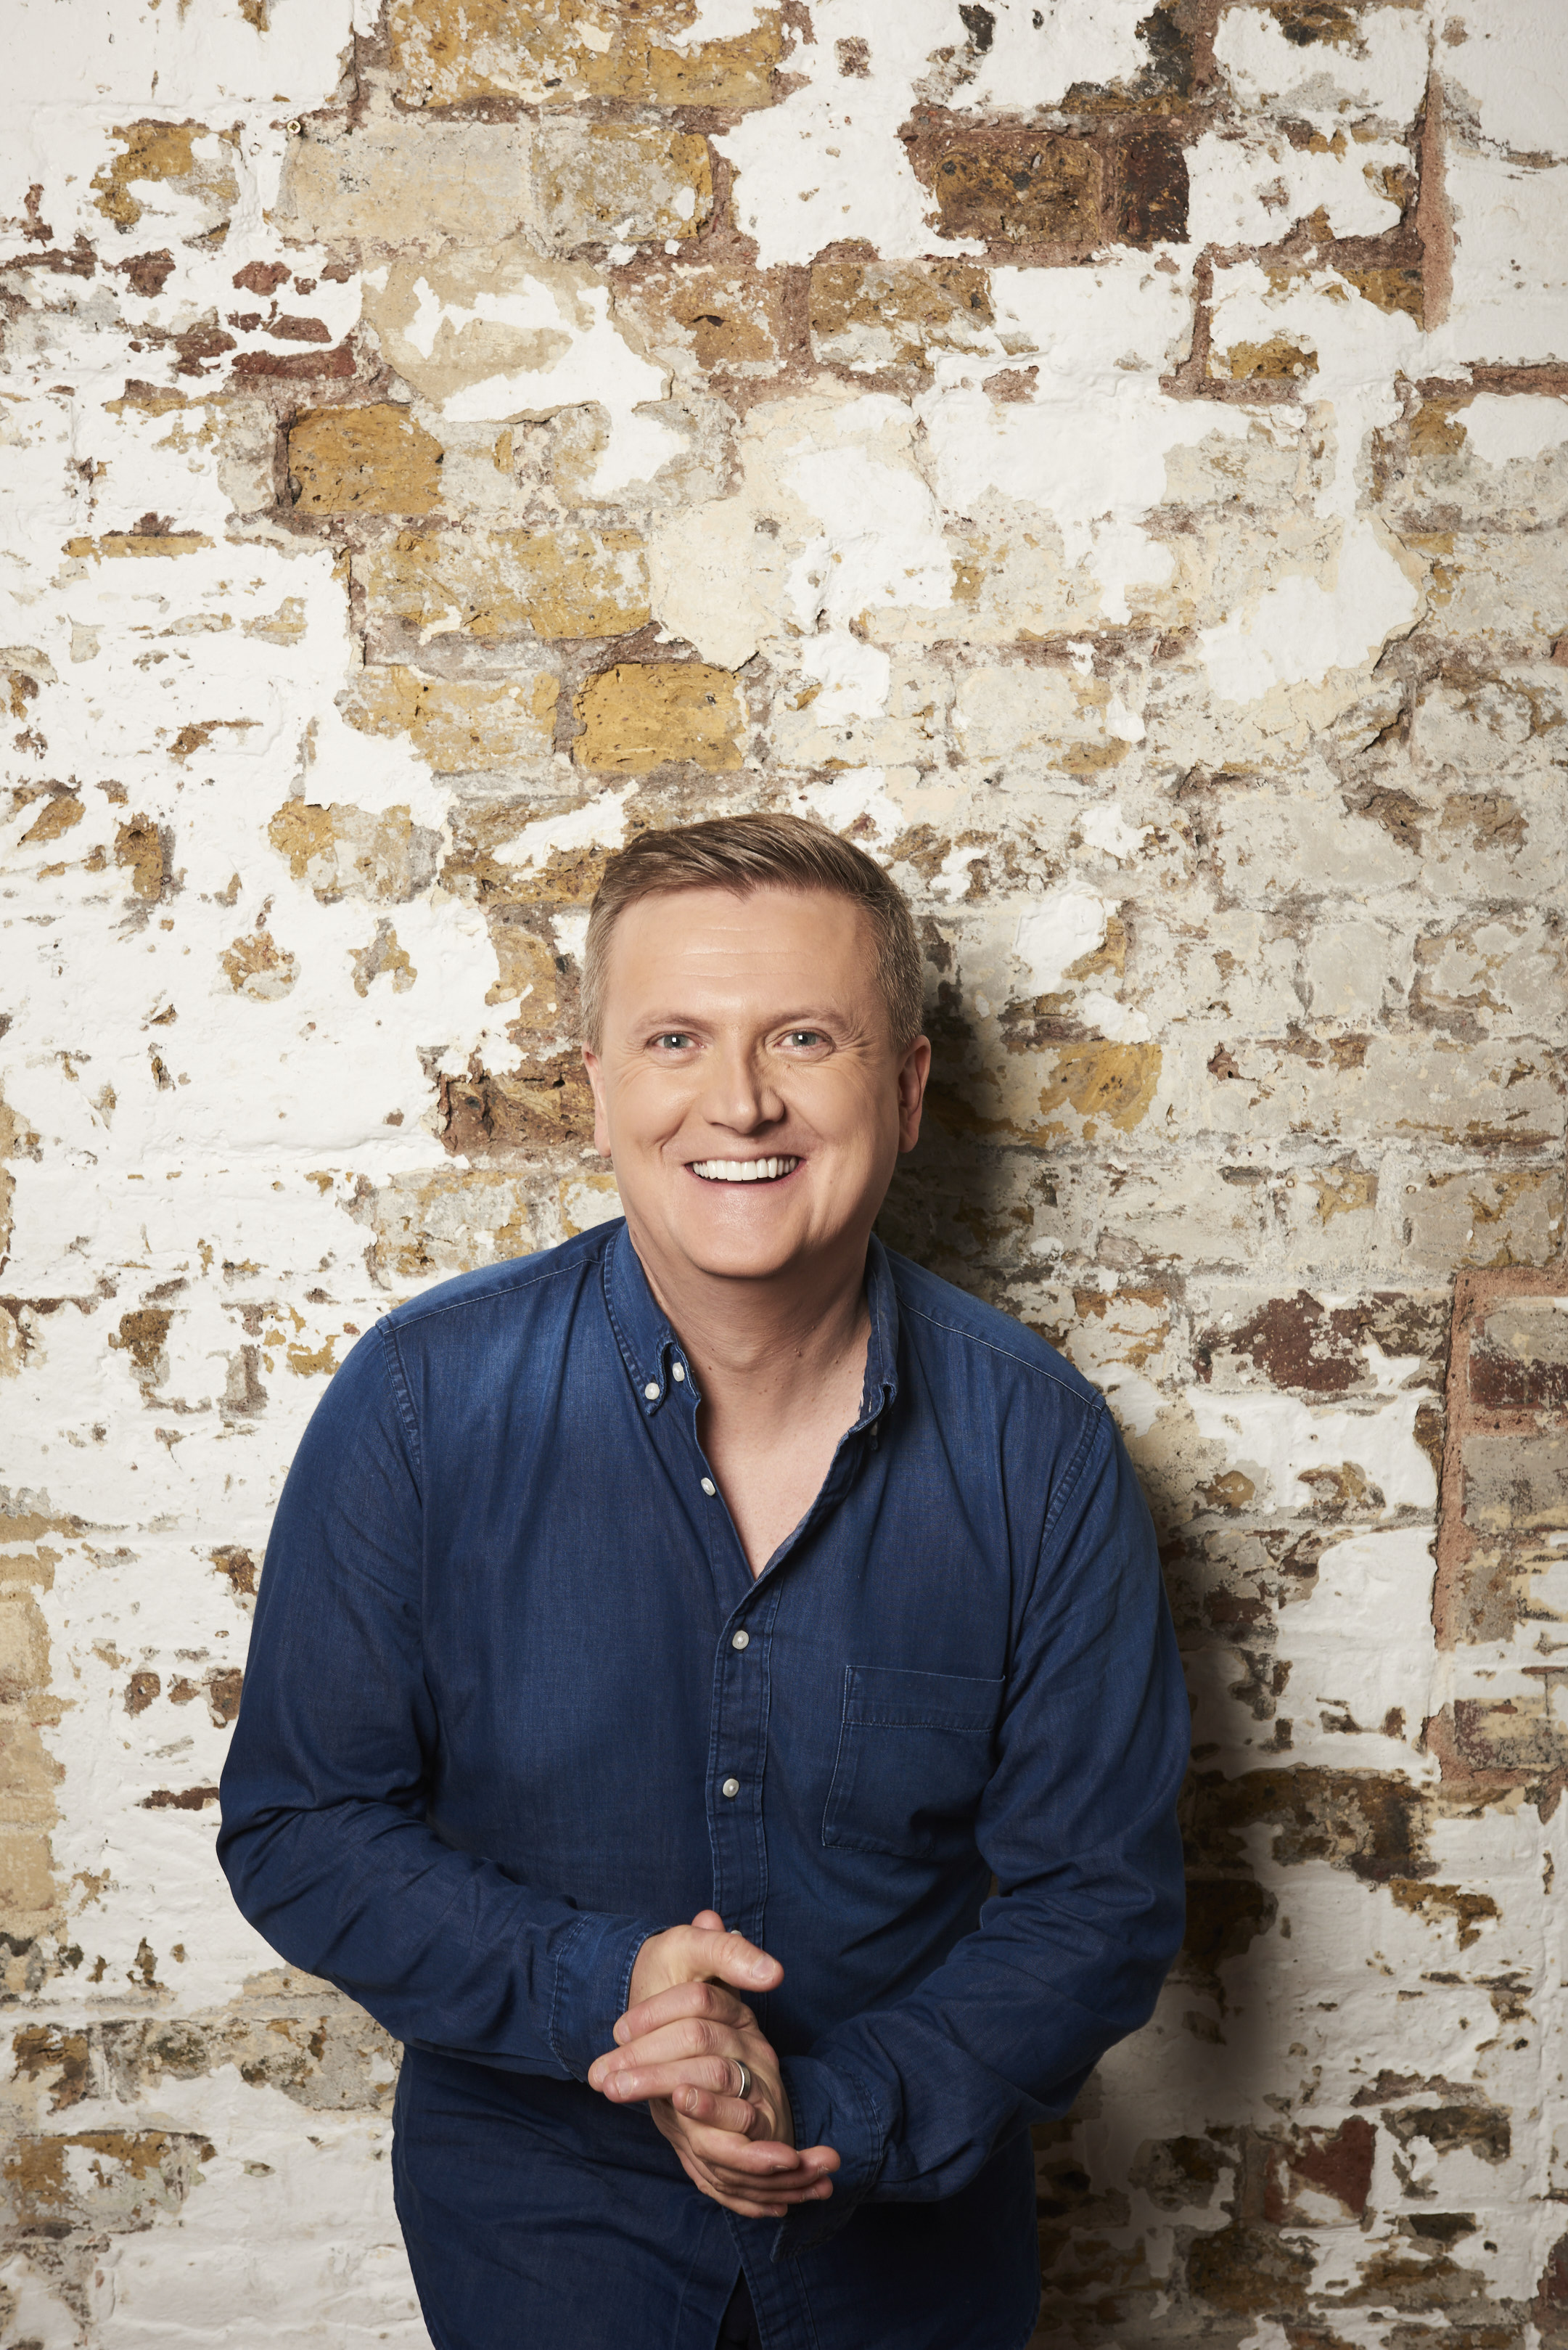 aled jones - approved tour pic - full circle